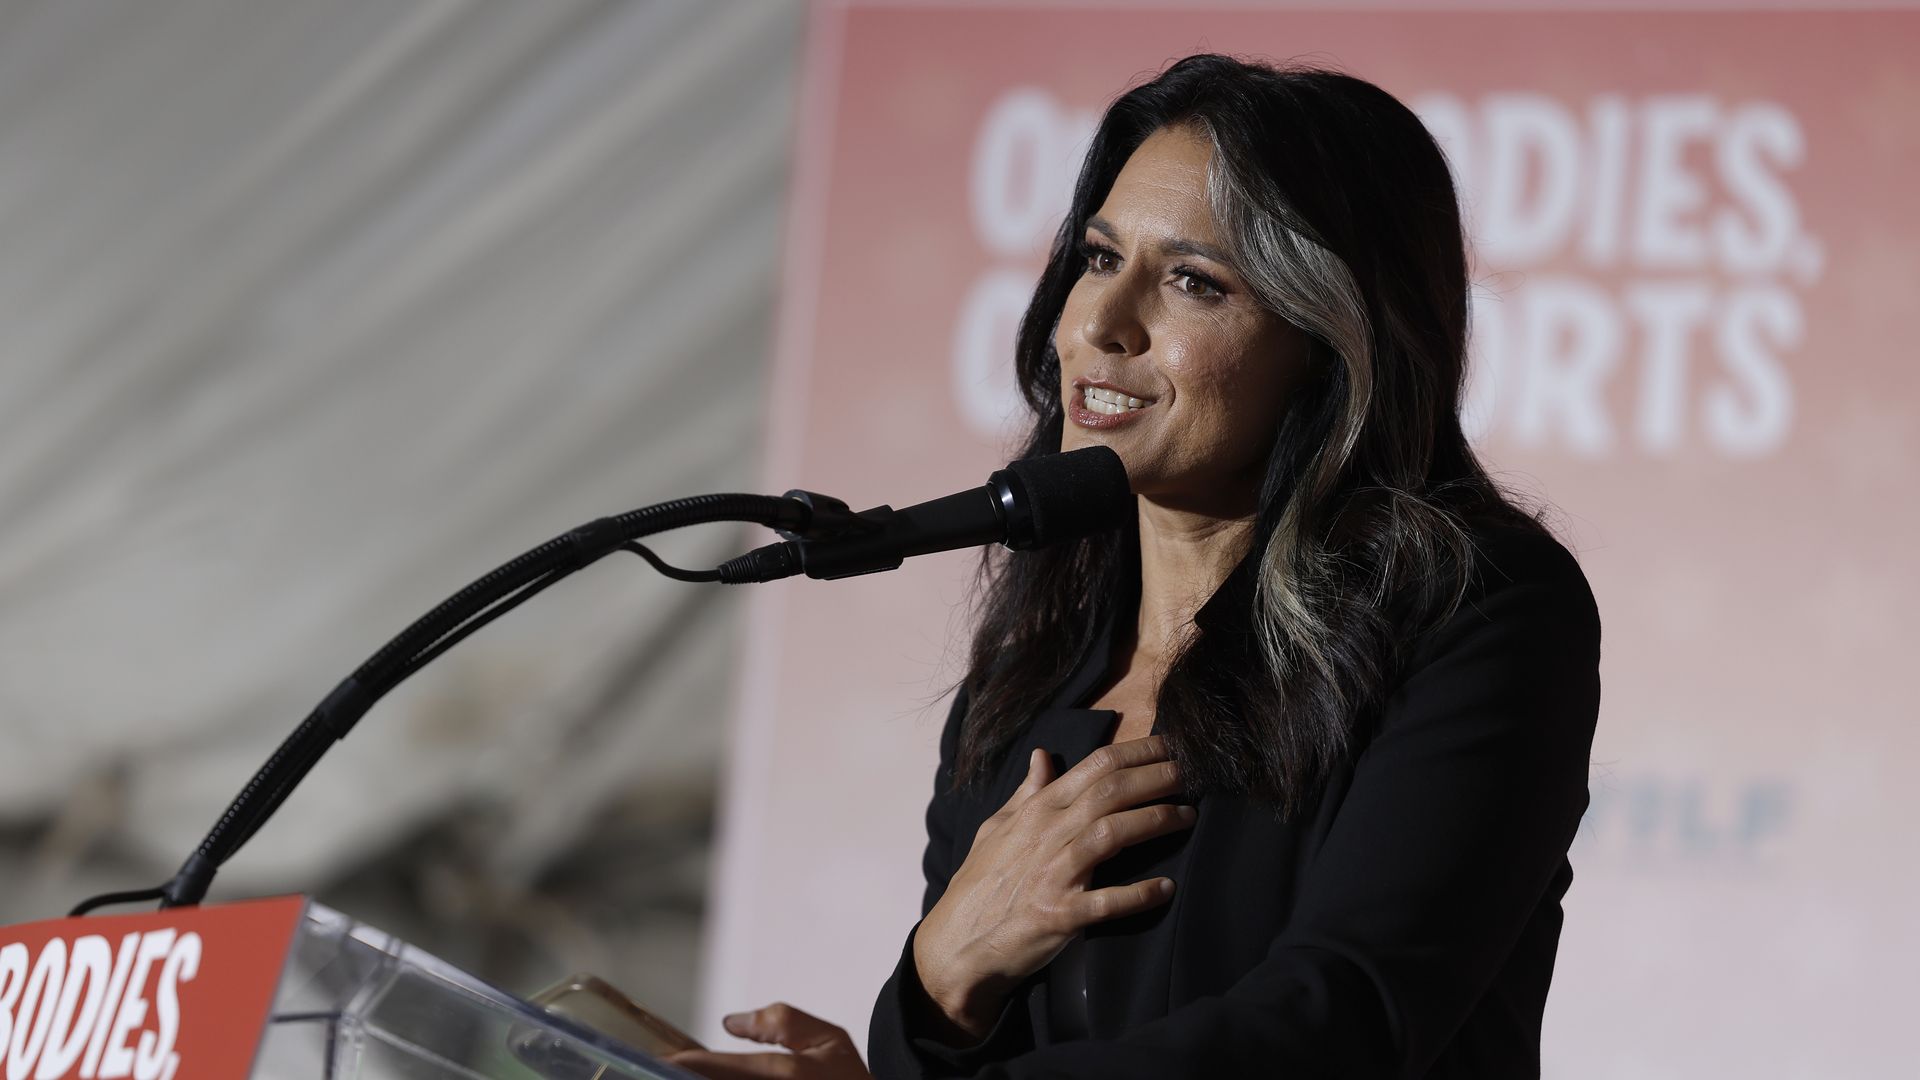 WASHINGTON, DC - JUNE 23: Former U.S. Rep. Tulsi Gabbard (D-HI) speaks at an "Our Bodies, Our Sports" rally to mark the 50th anniversary of Title IX at Freedom Plaza on June 23, 2022 in Washington, DC